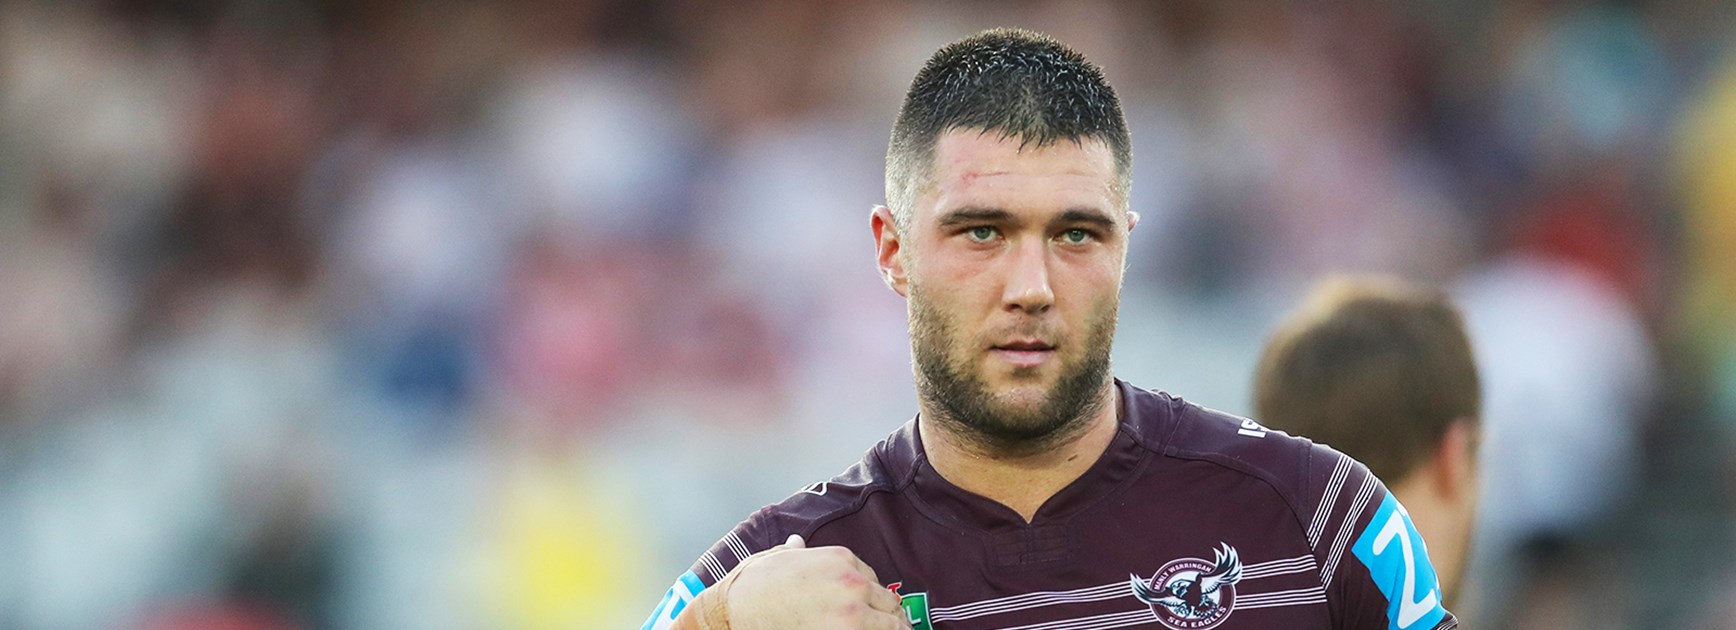 Former Wests Tigers forward Curtis Sironen has joined Manly Sea Eagles for the 2017 Telstra Premiership season.